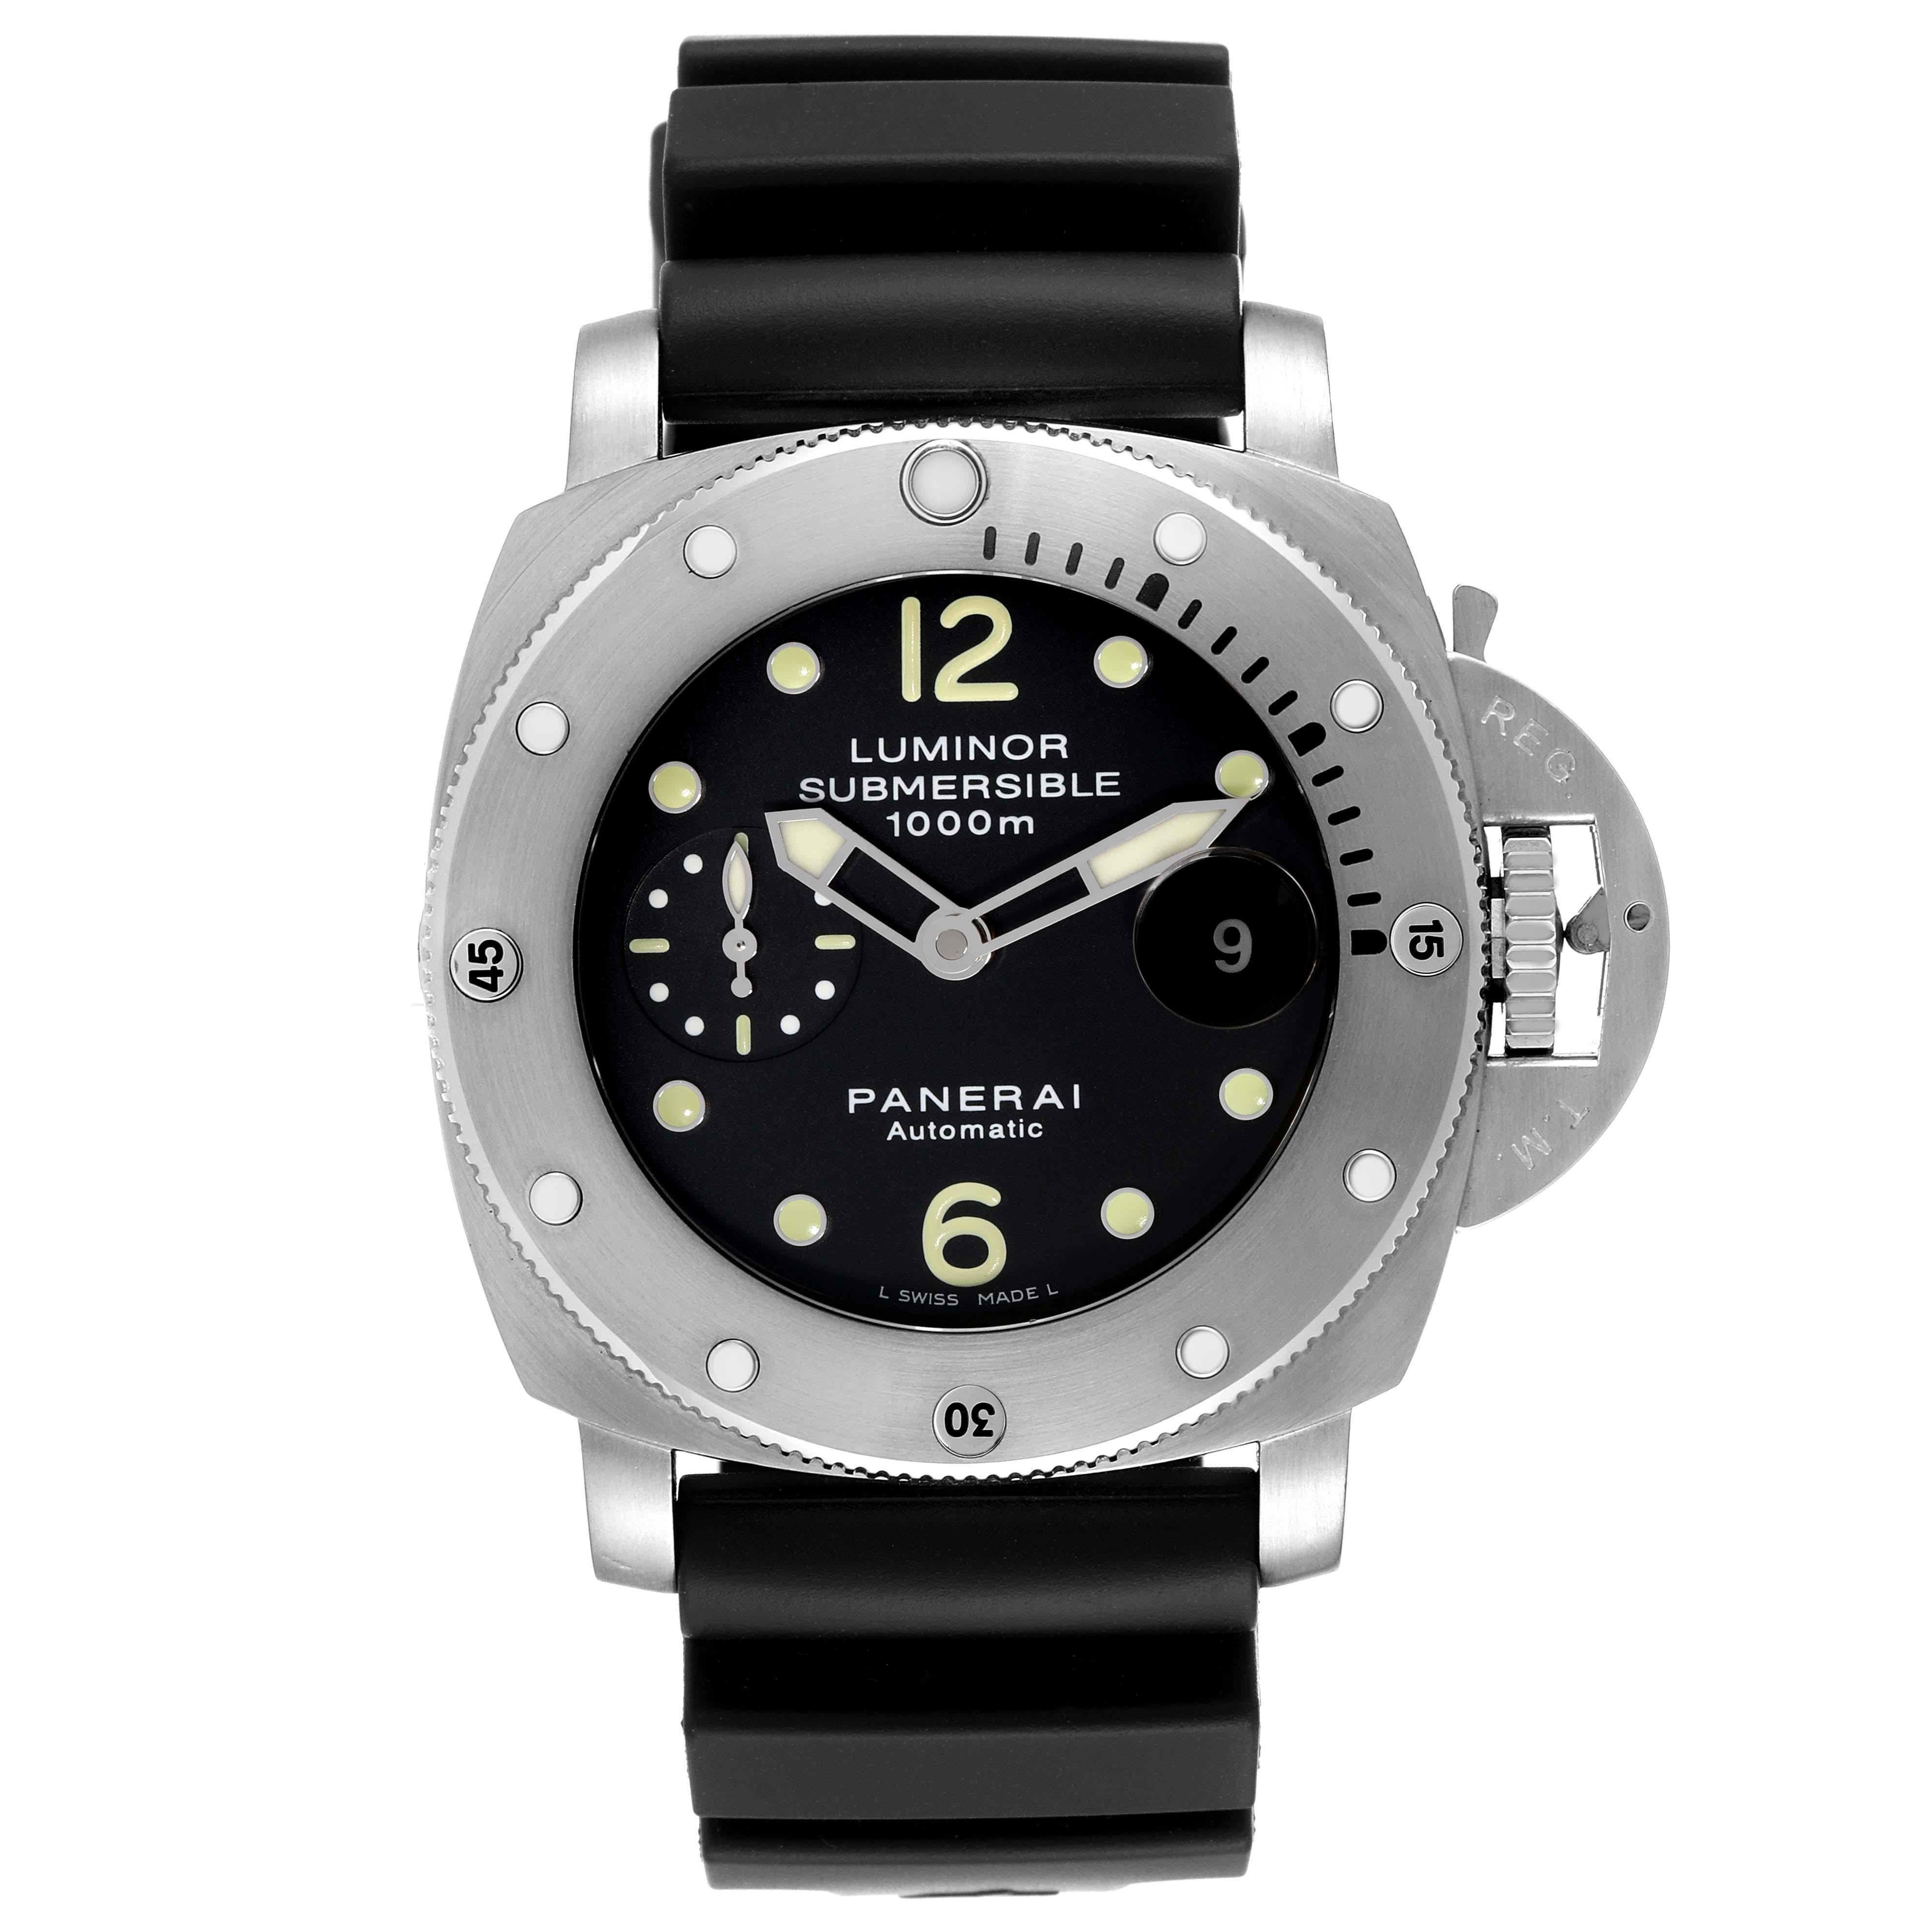 Panerai Luminor Submersible 44mm Steel Mens Watch PAM00243. Automatic self-winding movement. Two part cushion shaped titanium case 44.0 mm in diameter. Panerai patented crown protector. Unidirectional rotating professional diver's bezel. Scratch